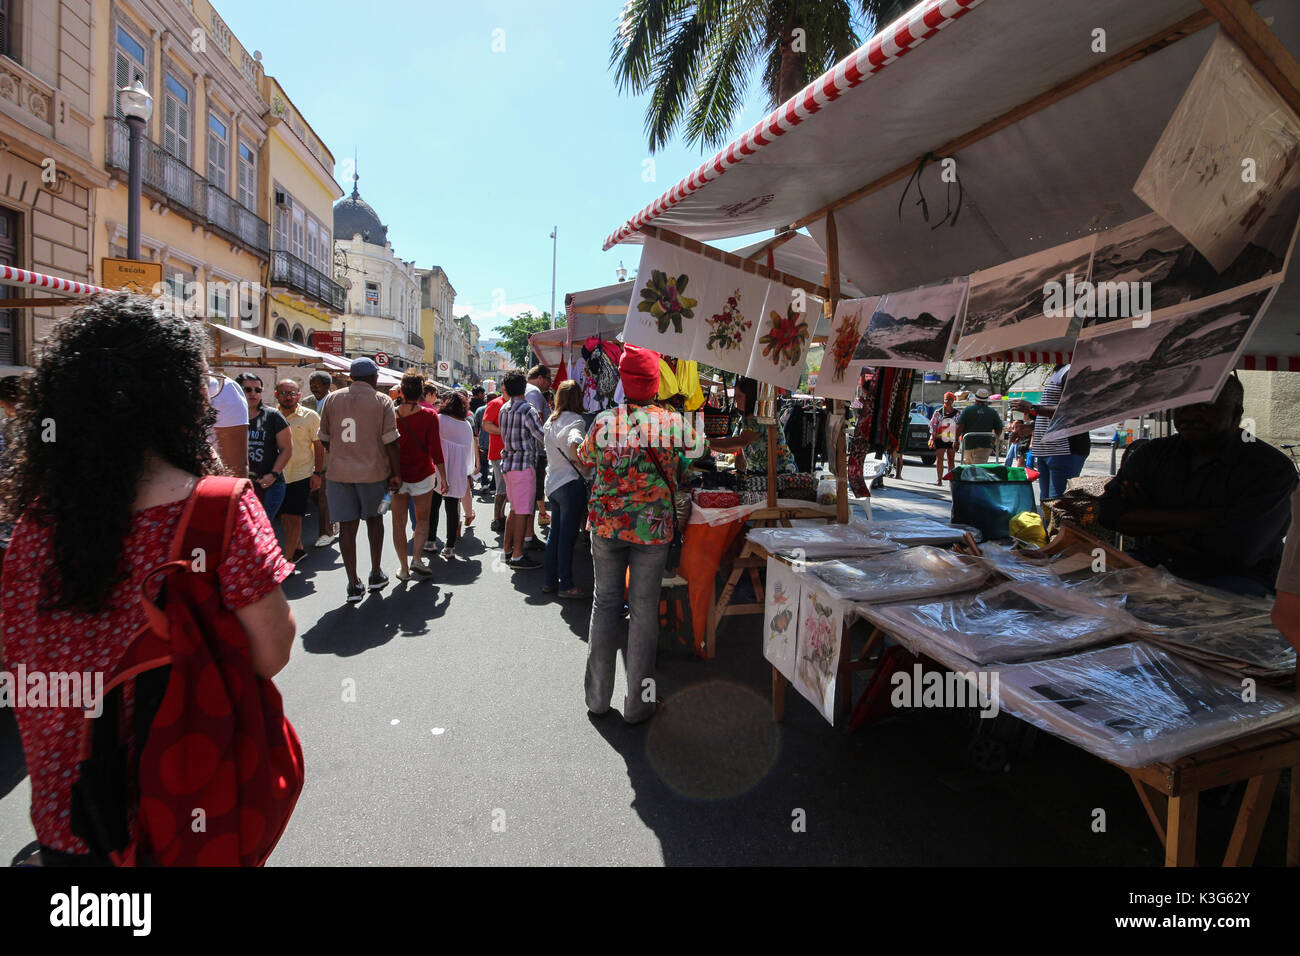 Rio de Janeiro, Brazil, September 02, 2017: Hundreds of collectors of antiques, artisans and artists exhibit their products in tents along Rua do Lavradio, one of the oldest streets in the center of Rio. people take advantage of the cultural program for shopping and also to enjoy the gastronomy of the restaurants of the region of Lapa, where the fair happens. Credit: Luiz Souza/Alamy Live News Stock Photo